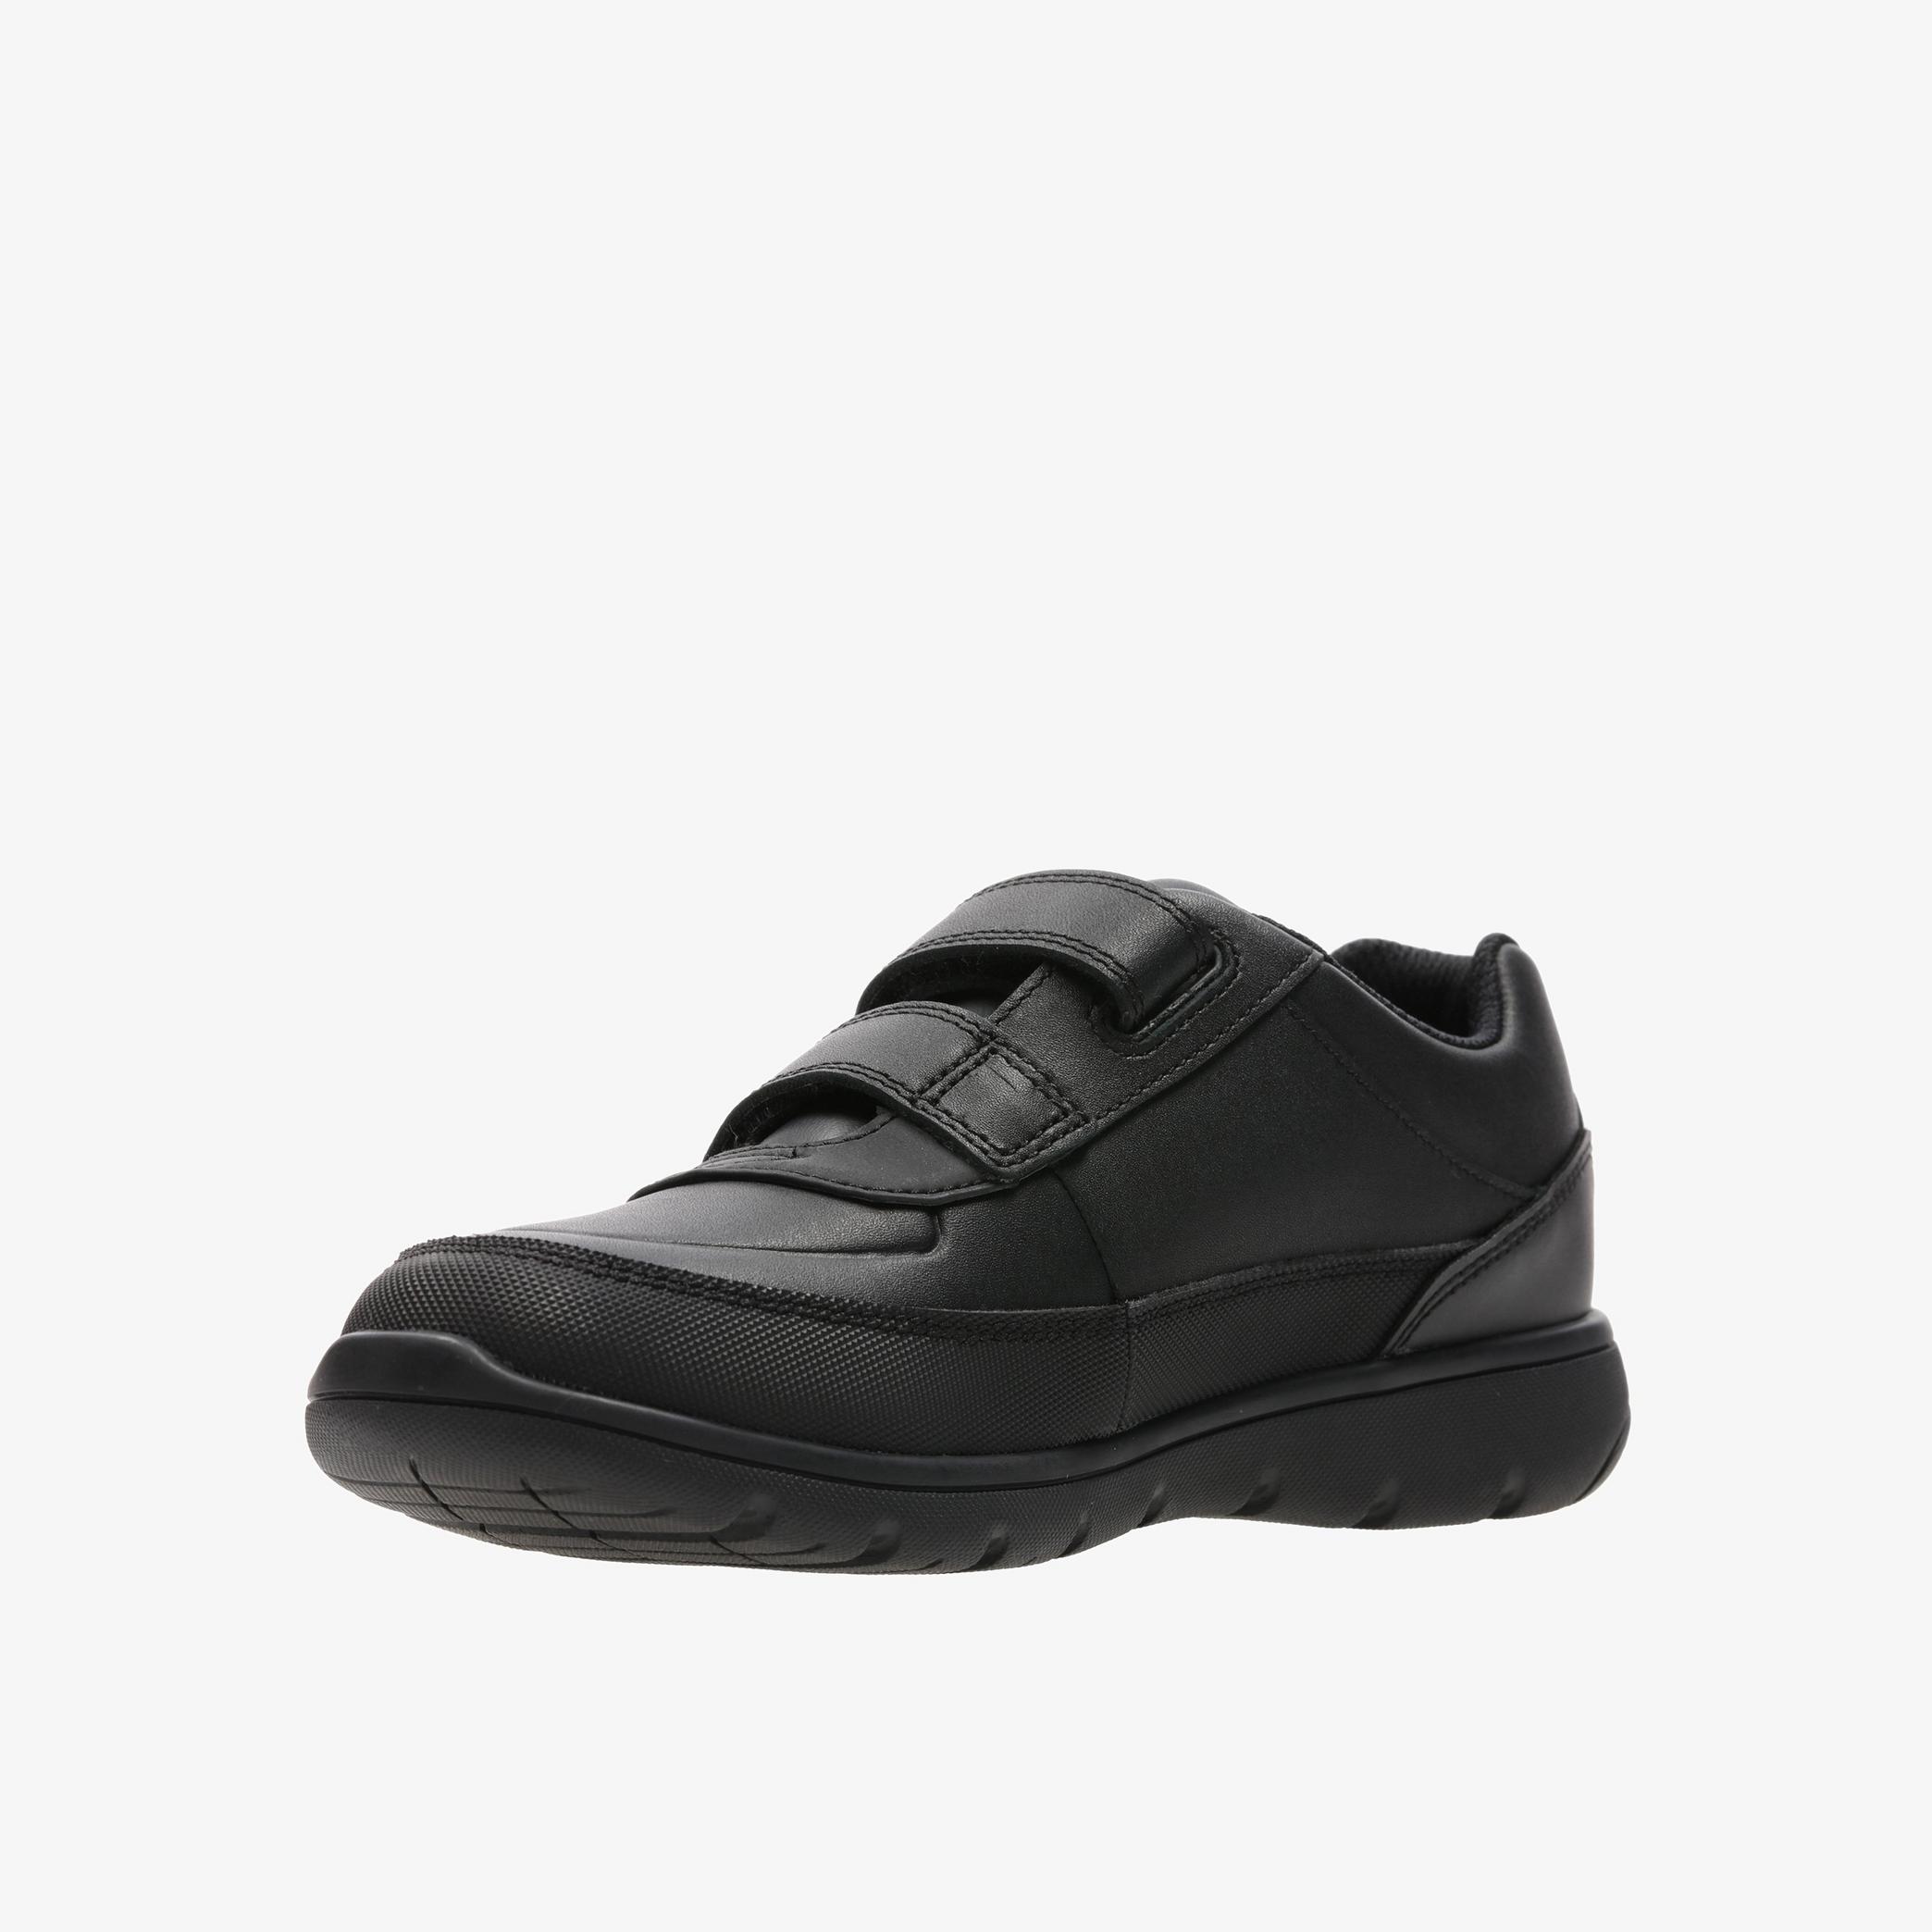 Venture Walk Youth Black Leather Shoes, view 4 of 6